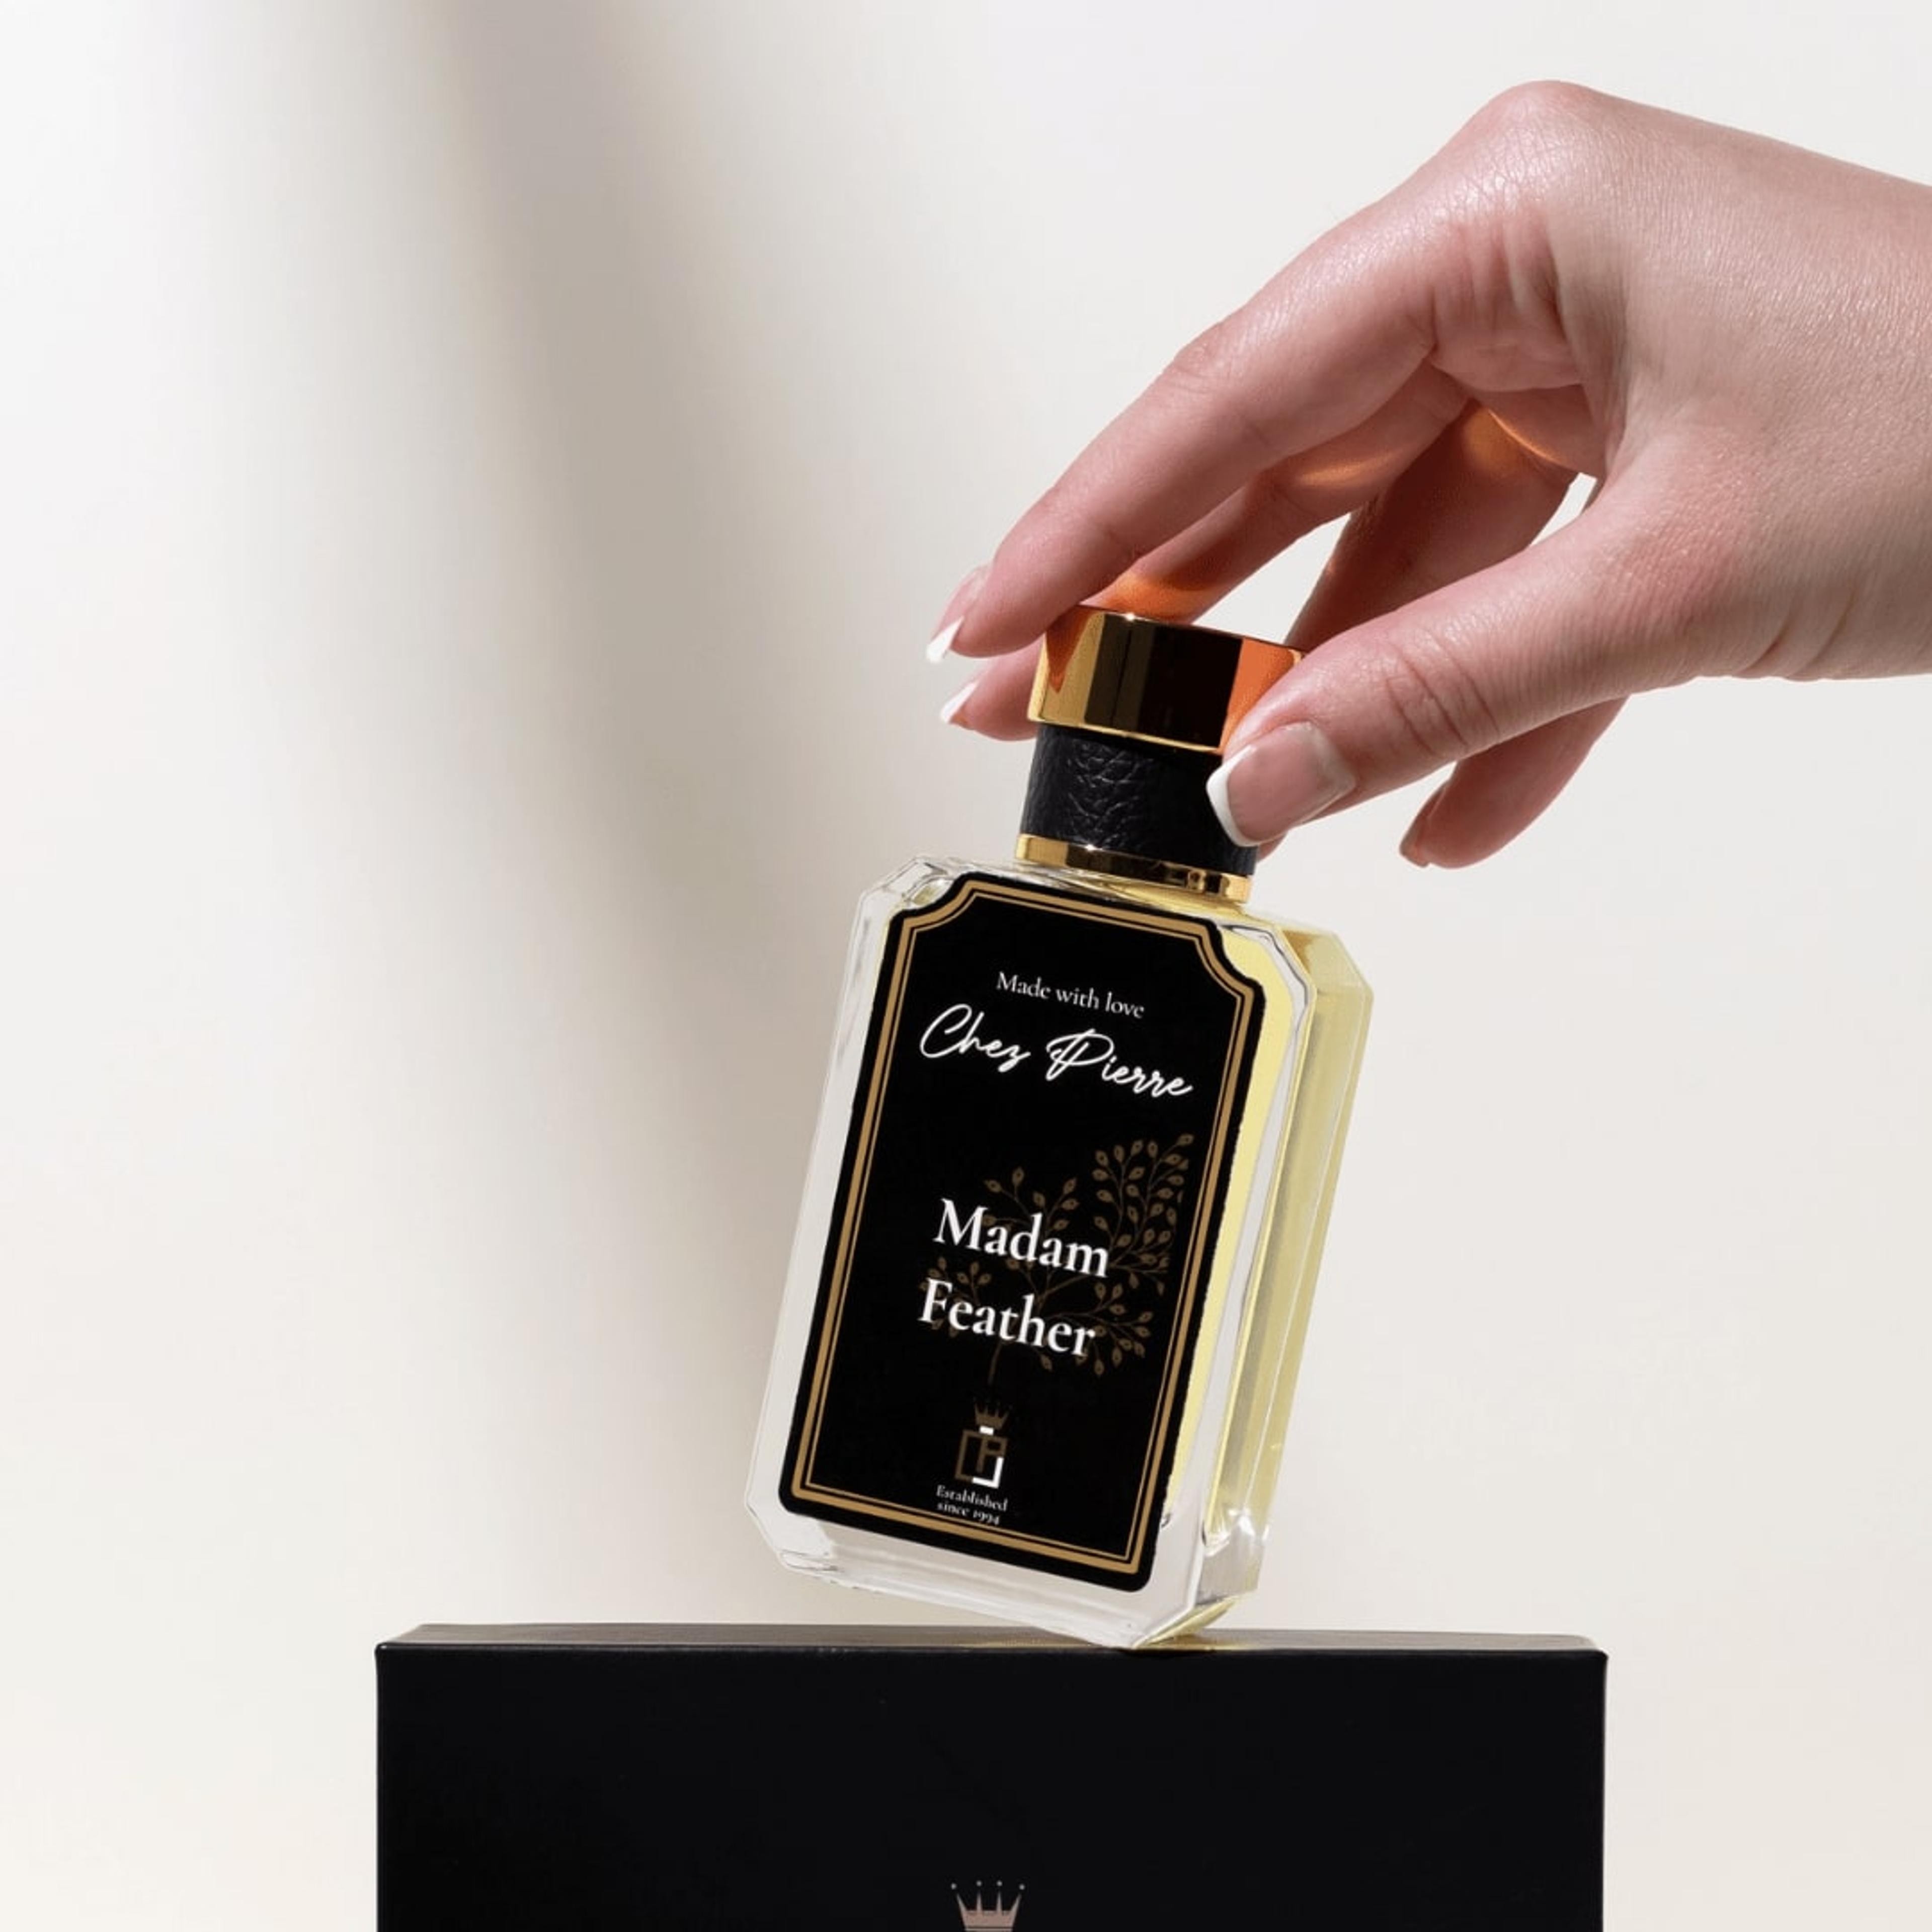 Chez Pierre's Madam FeatherPerfume Inspired By Coco Mademoiselle